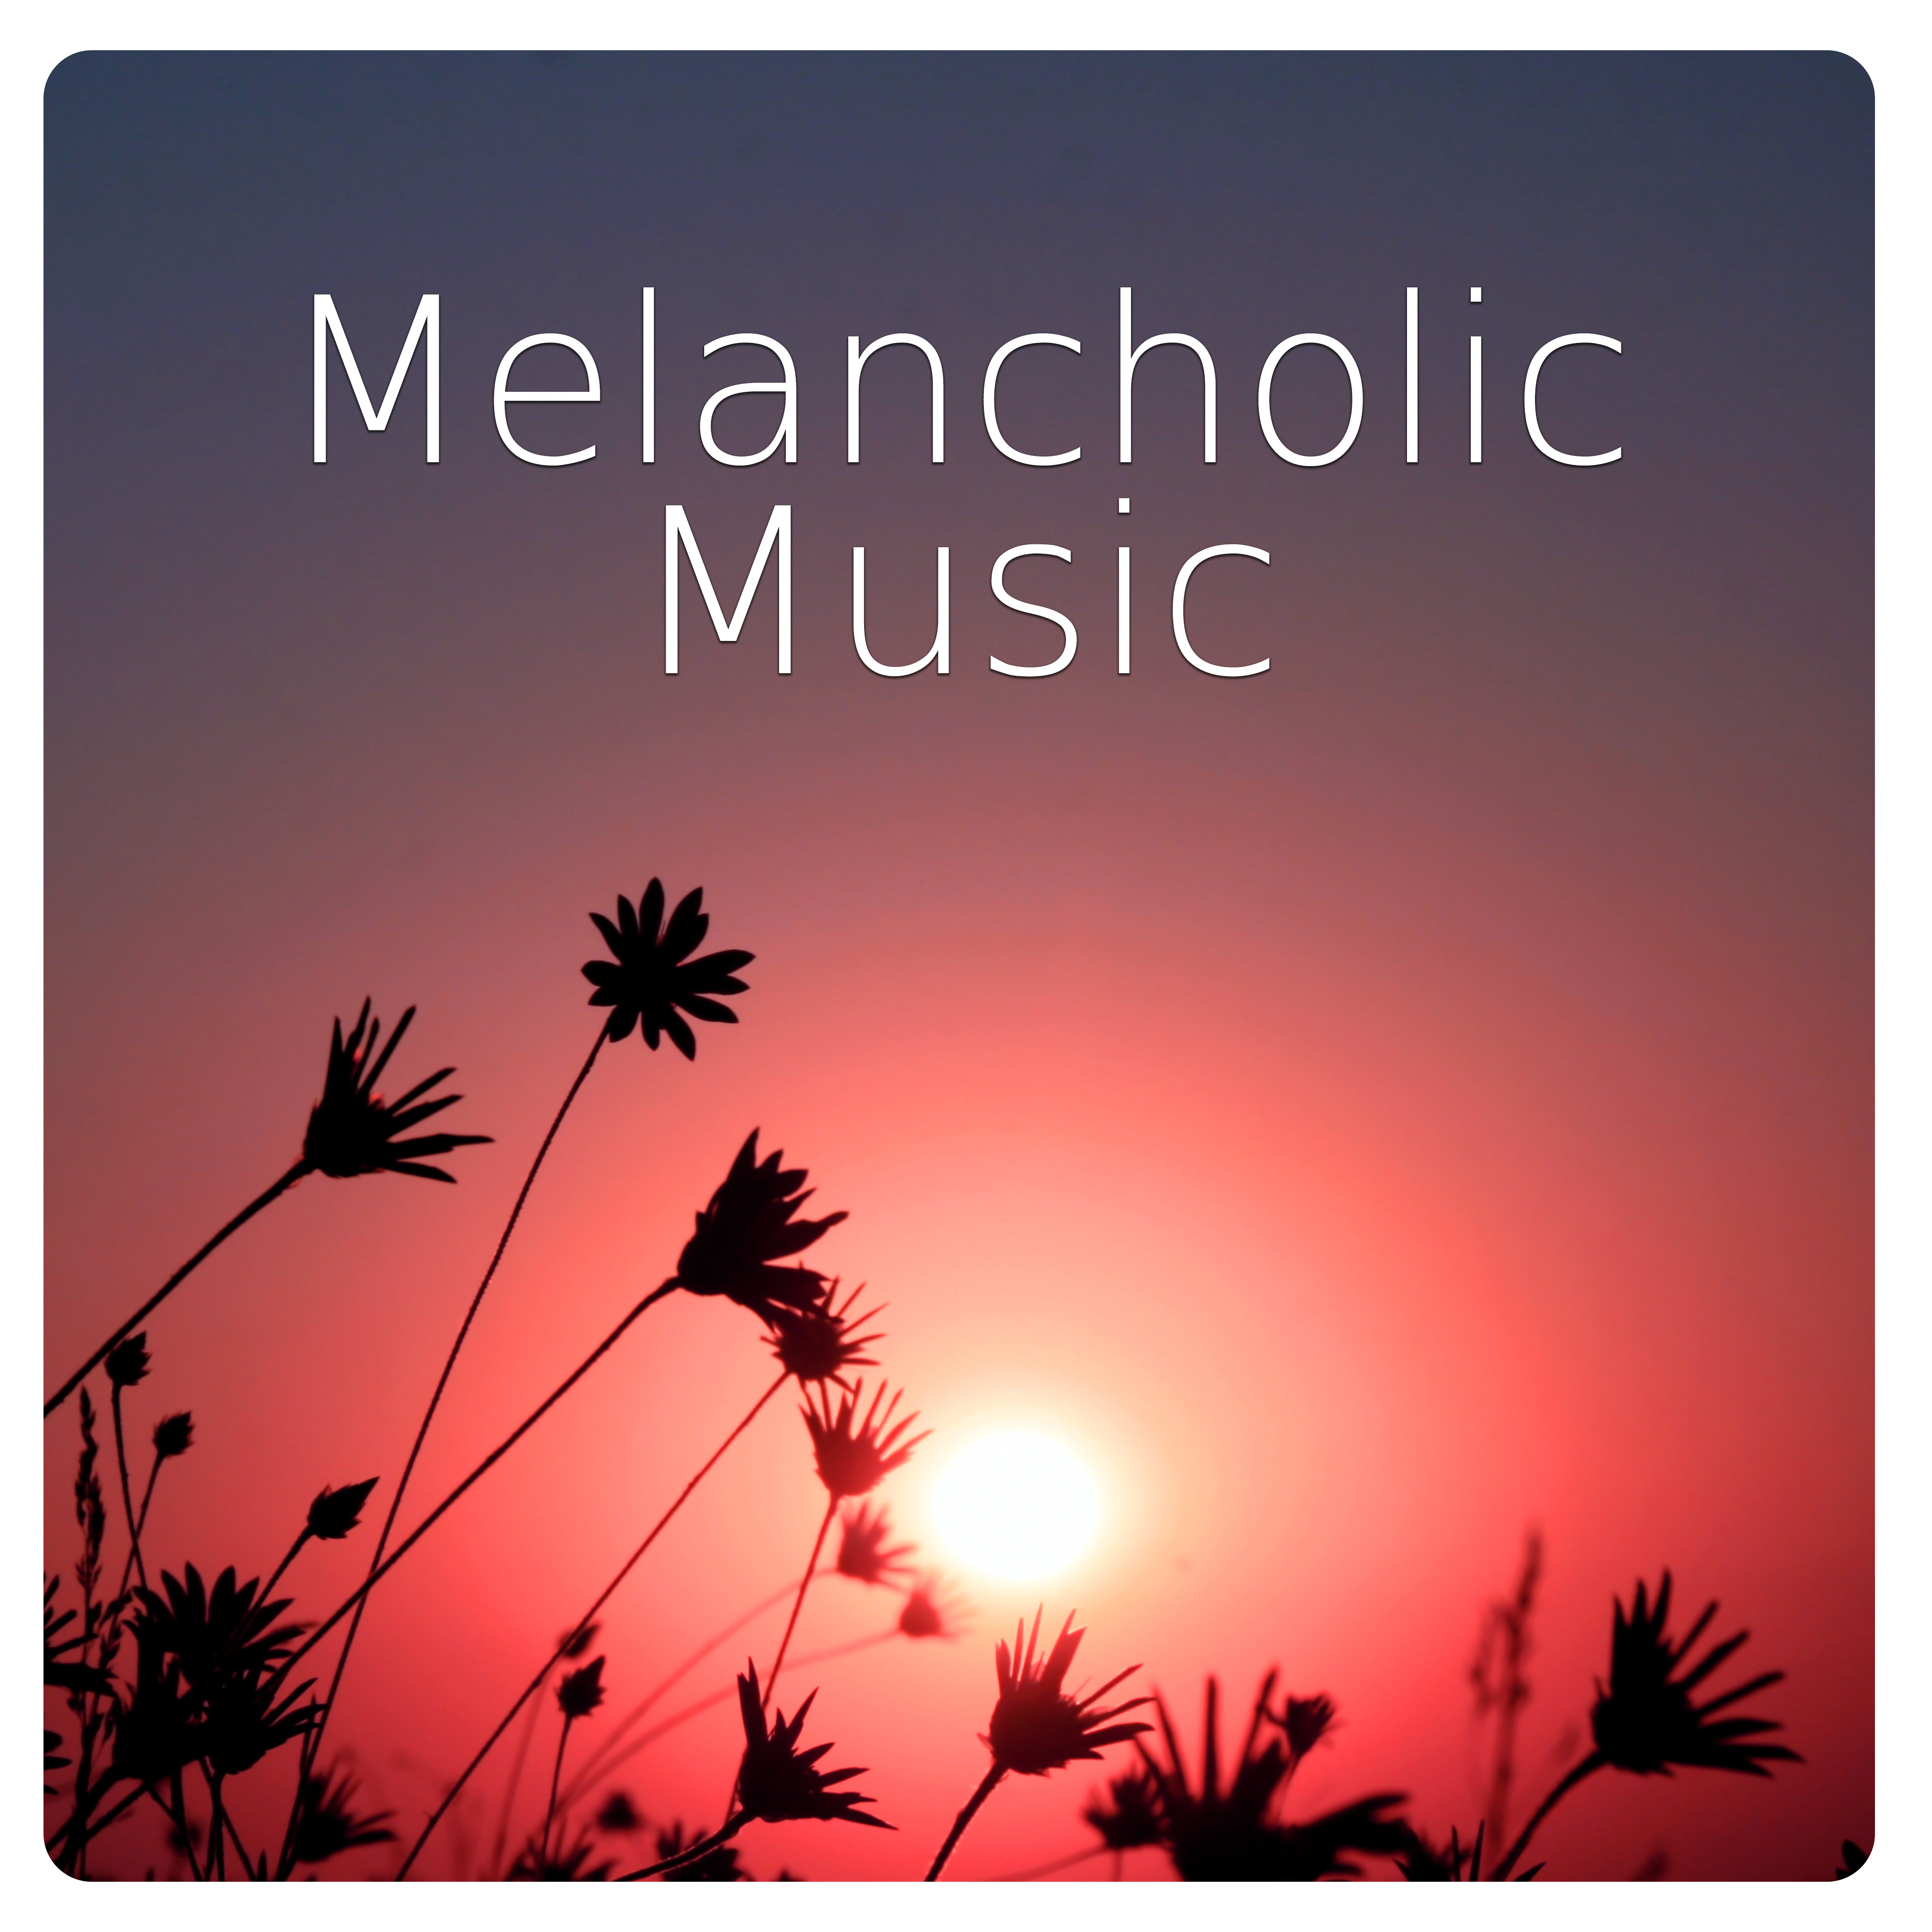 Melancholic Music - Inspiring Nature Sounds for Yoga and Sleep Meditation, Music to Dream, Background for Bedtime Stories